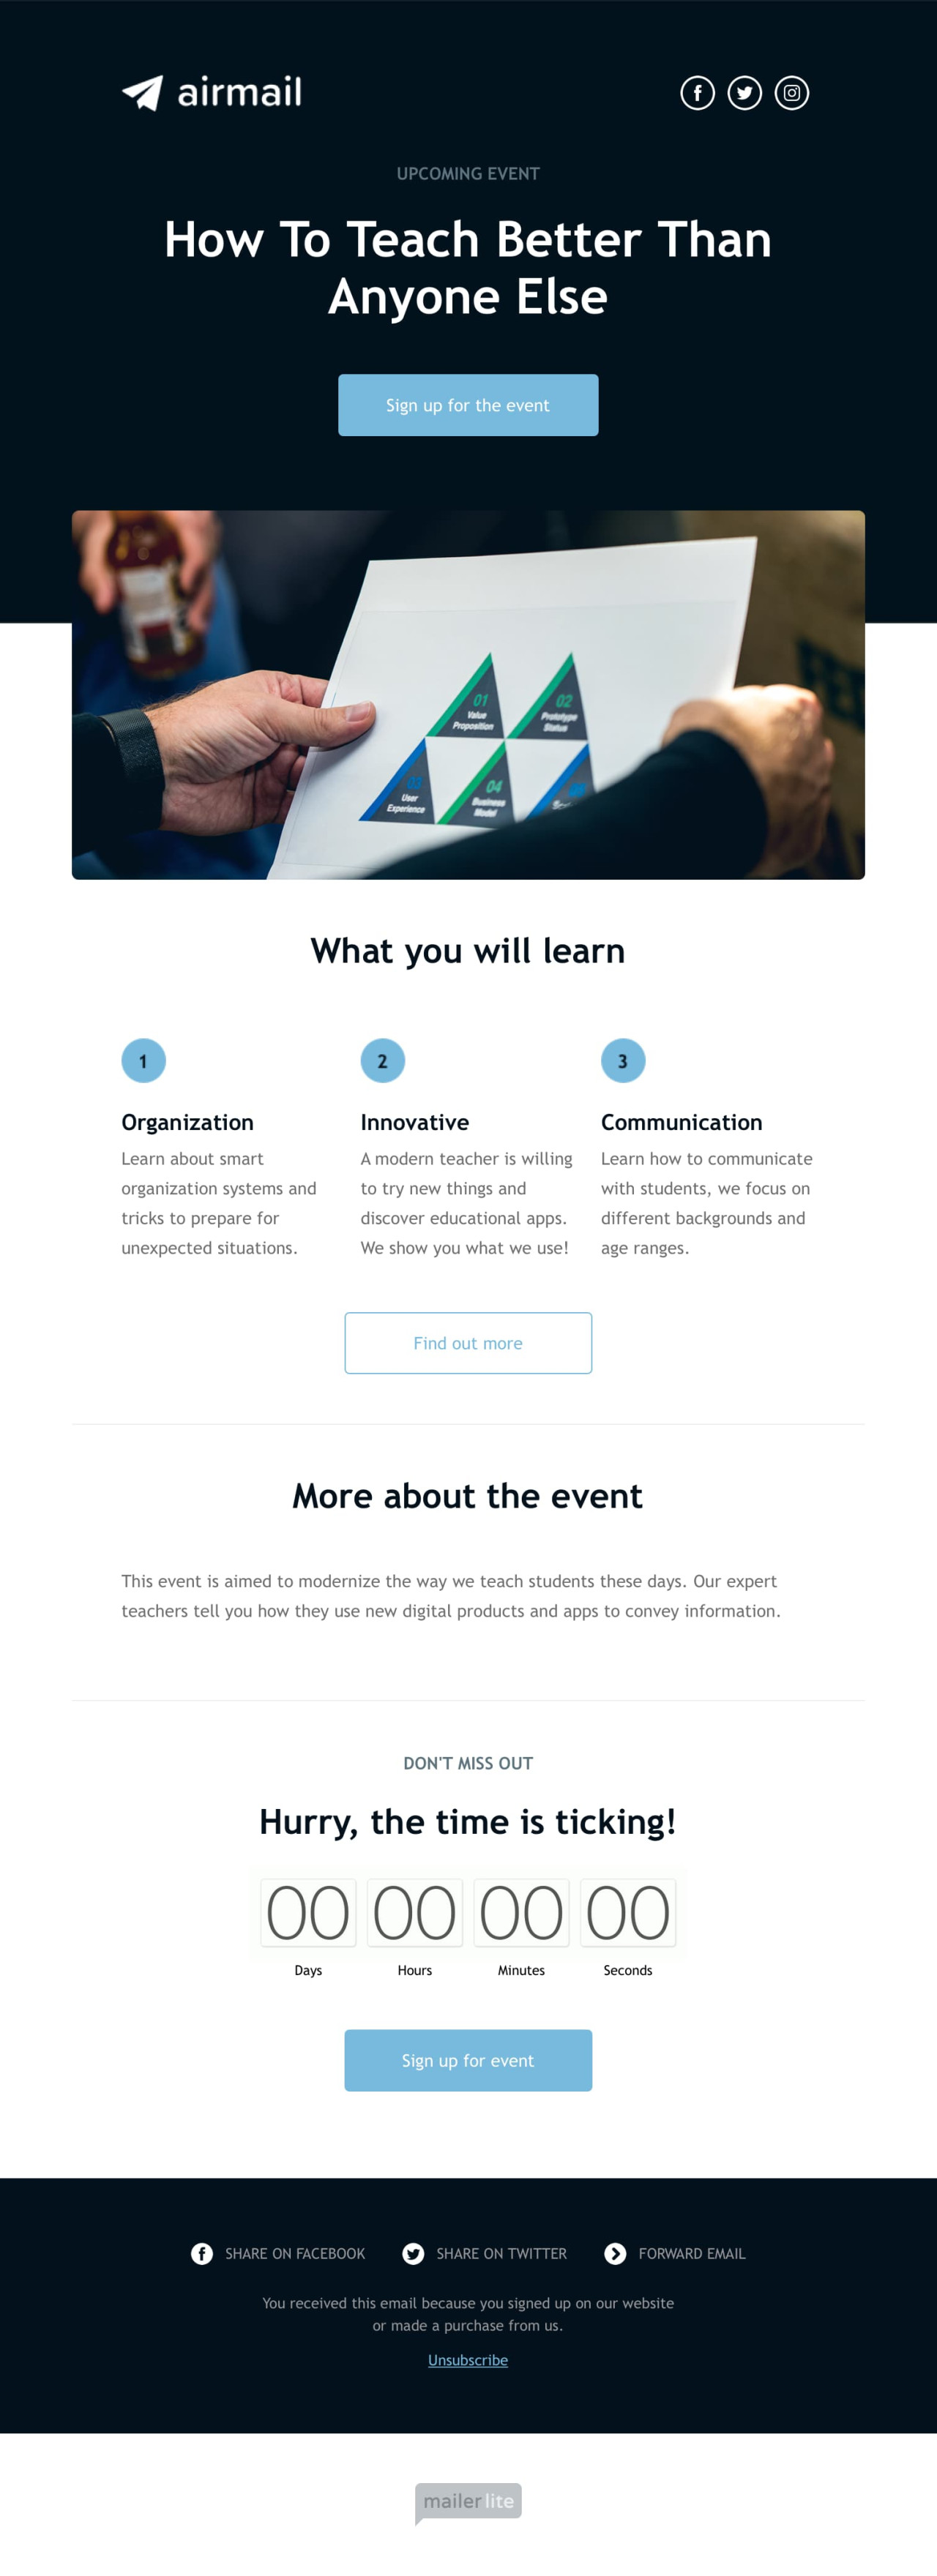 Event invitation template - Made by MailerLite